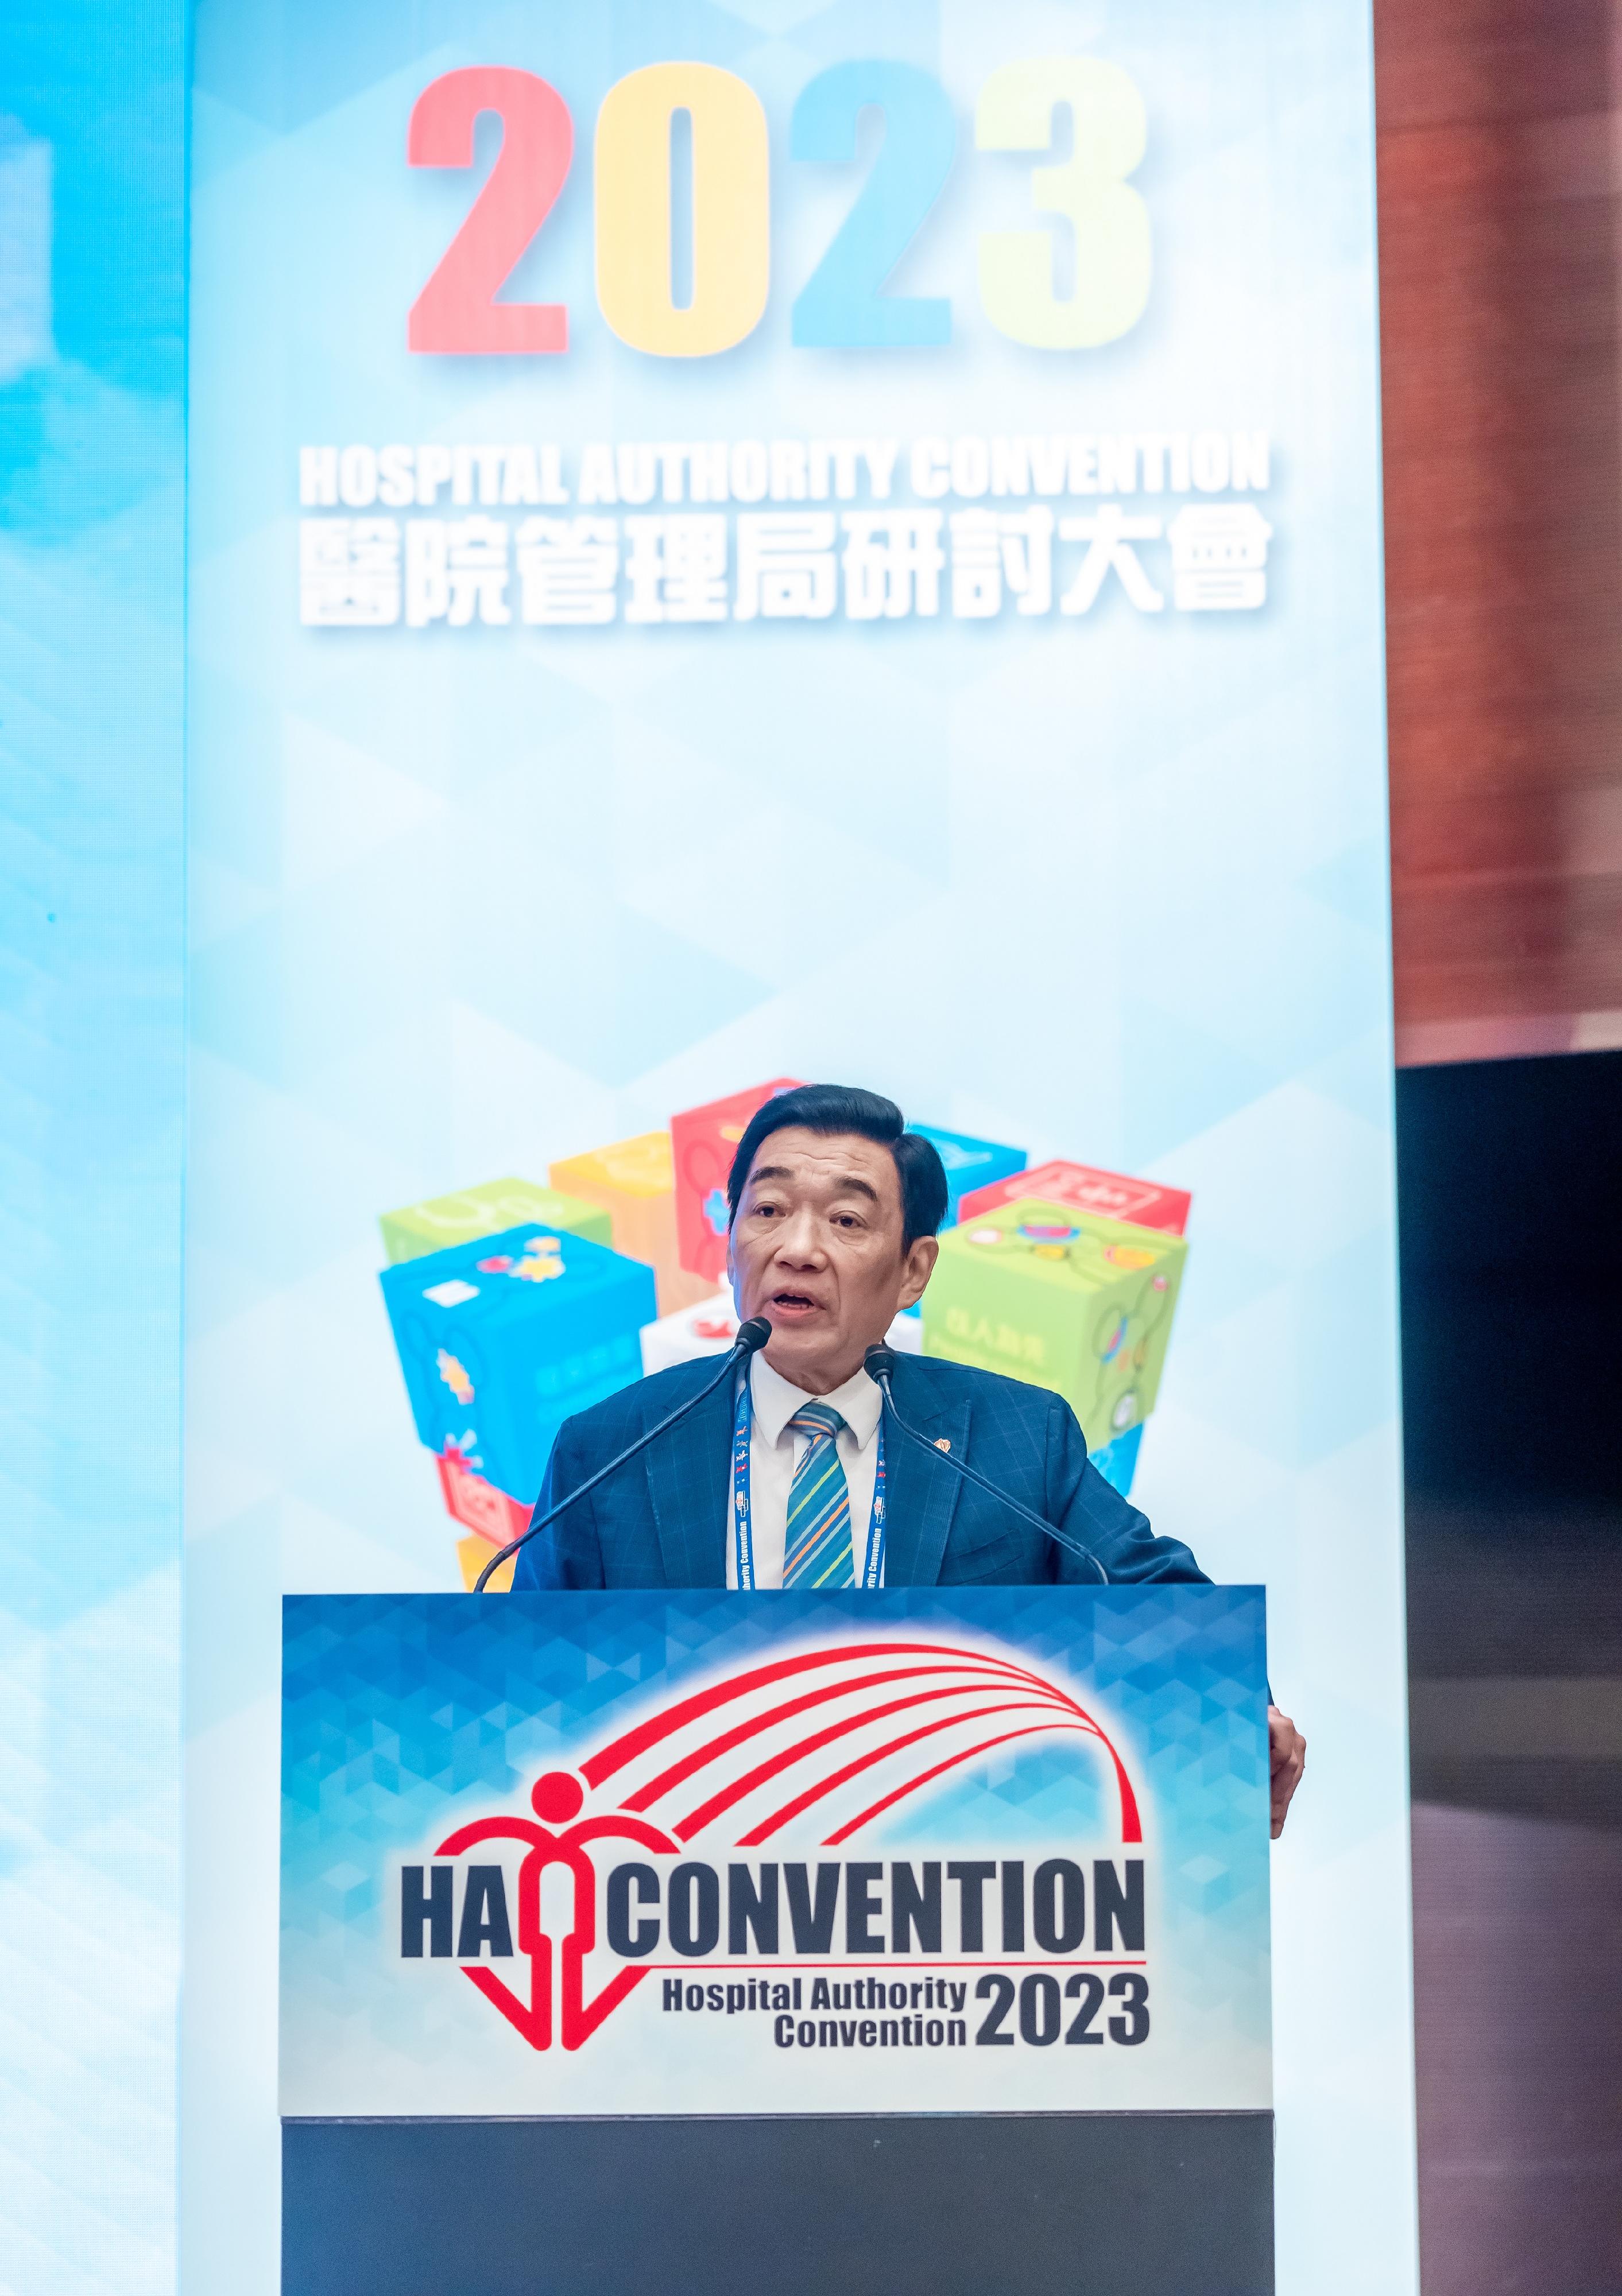 The Hospital Authority (HA) Convention 2023 is being held in both physical and virtual formats today and tomorrow (May 16 and 17). Photo shows the HA Chairman, Mr Henry Fan, delivering a welcome address at the opening ceremony of the Convention.